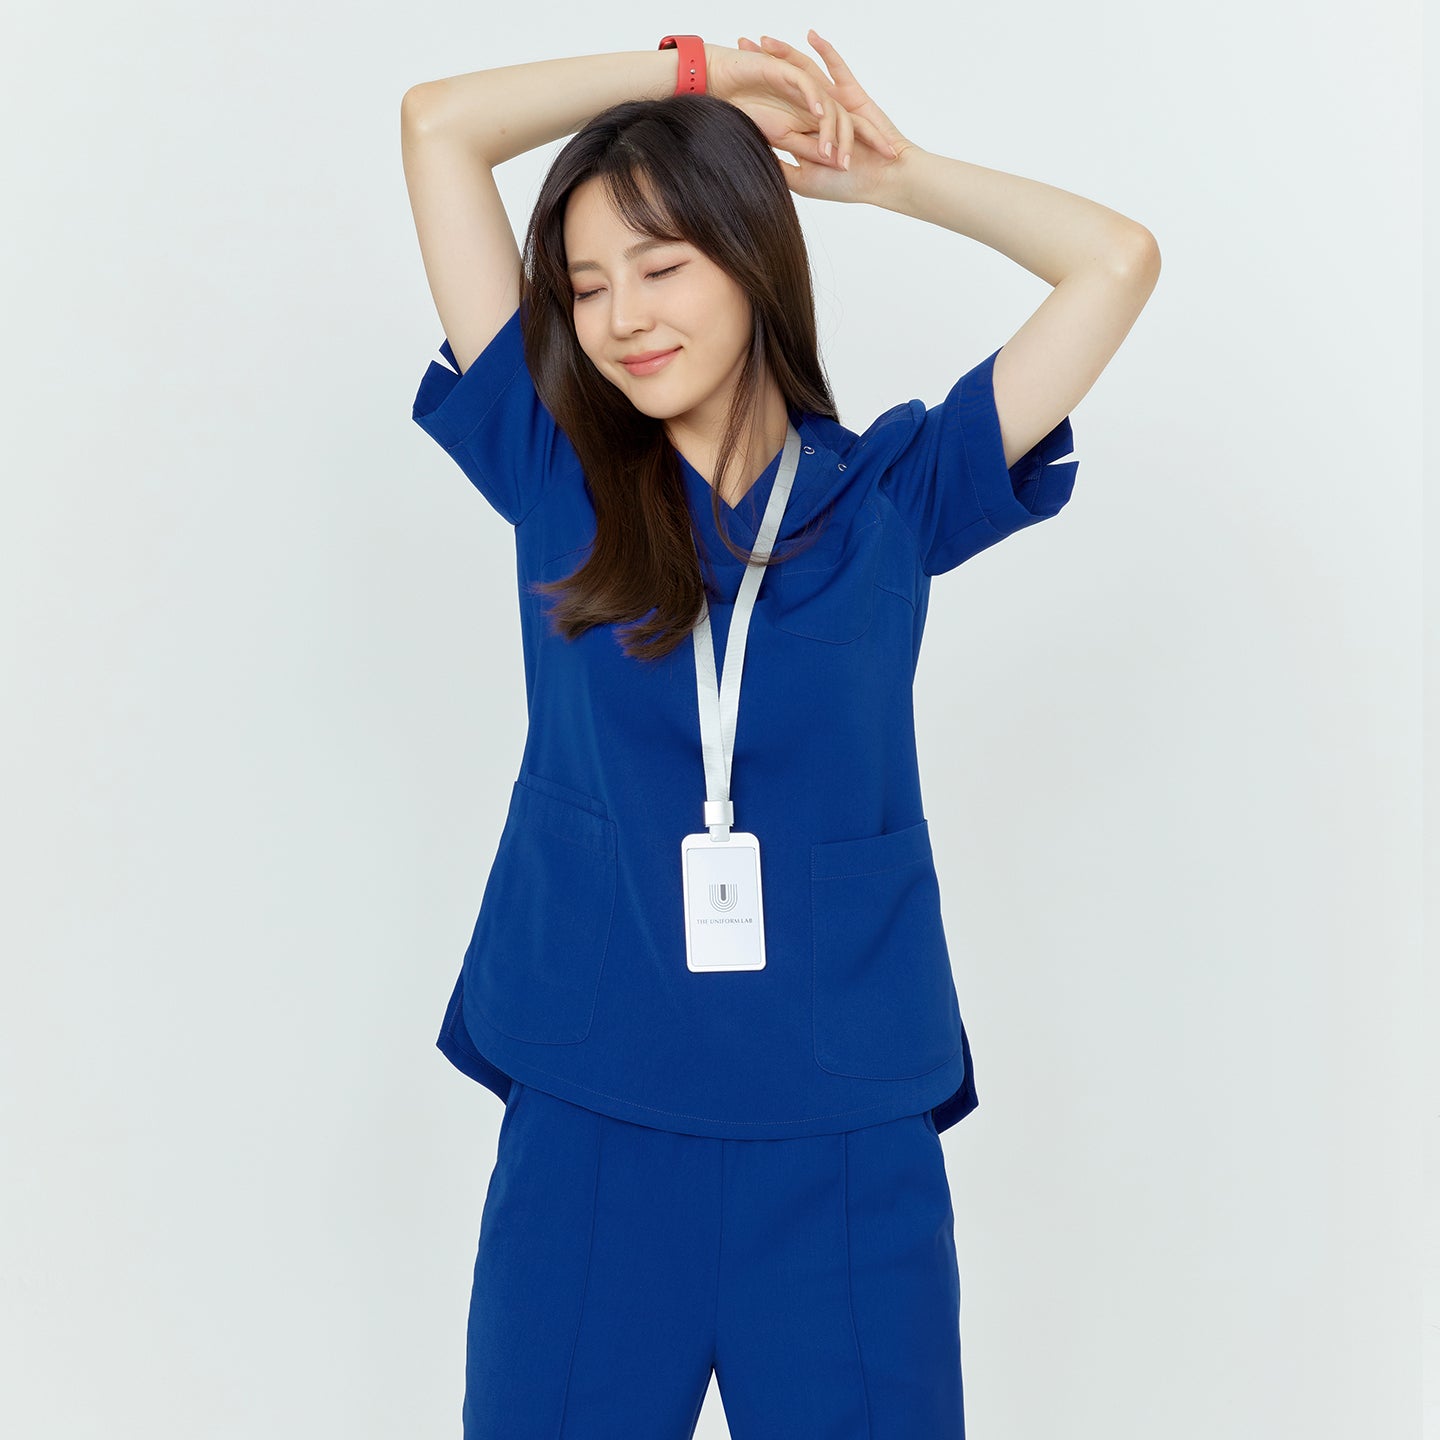 Woman in medical scrubs, stretching with arms above her head, smiling with eyes closed,Royal Blue